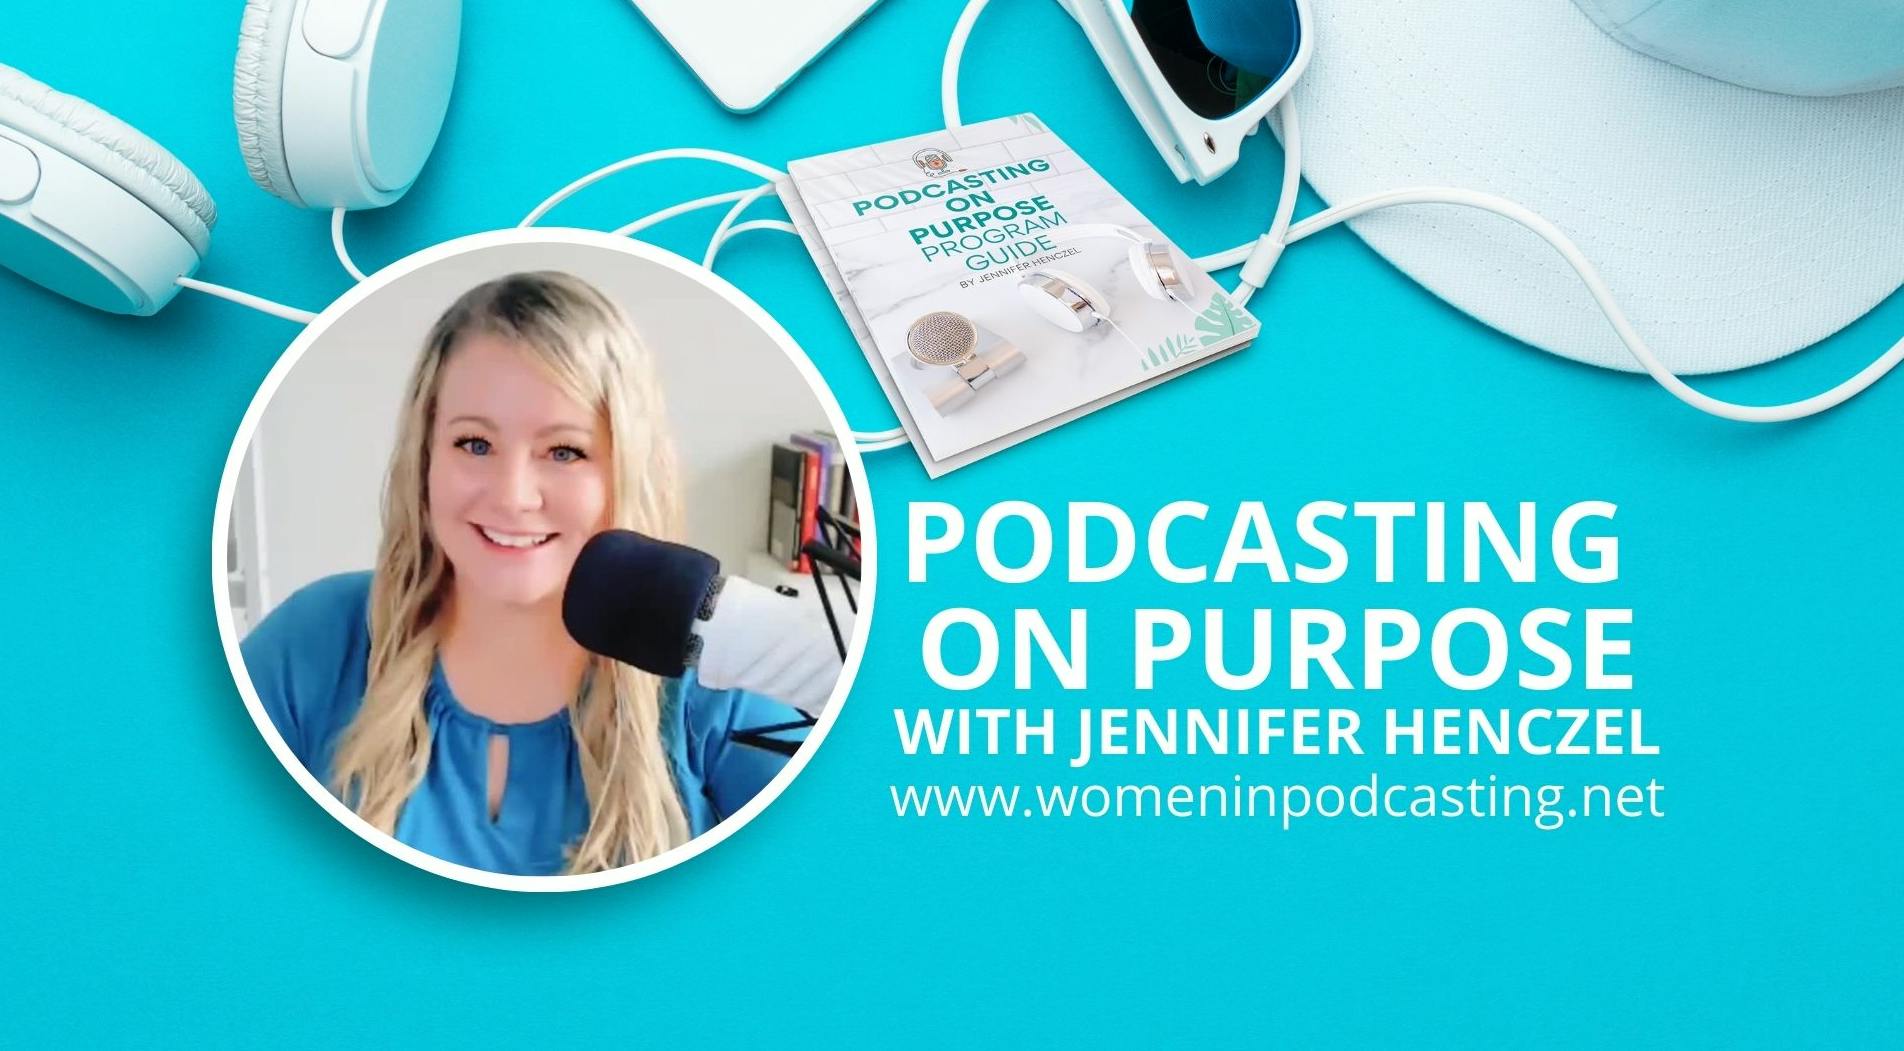 Bright blue background with a circular image of podcast course teacher. There's a part of white headphones above her and white text that says 